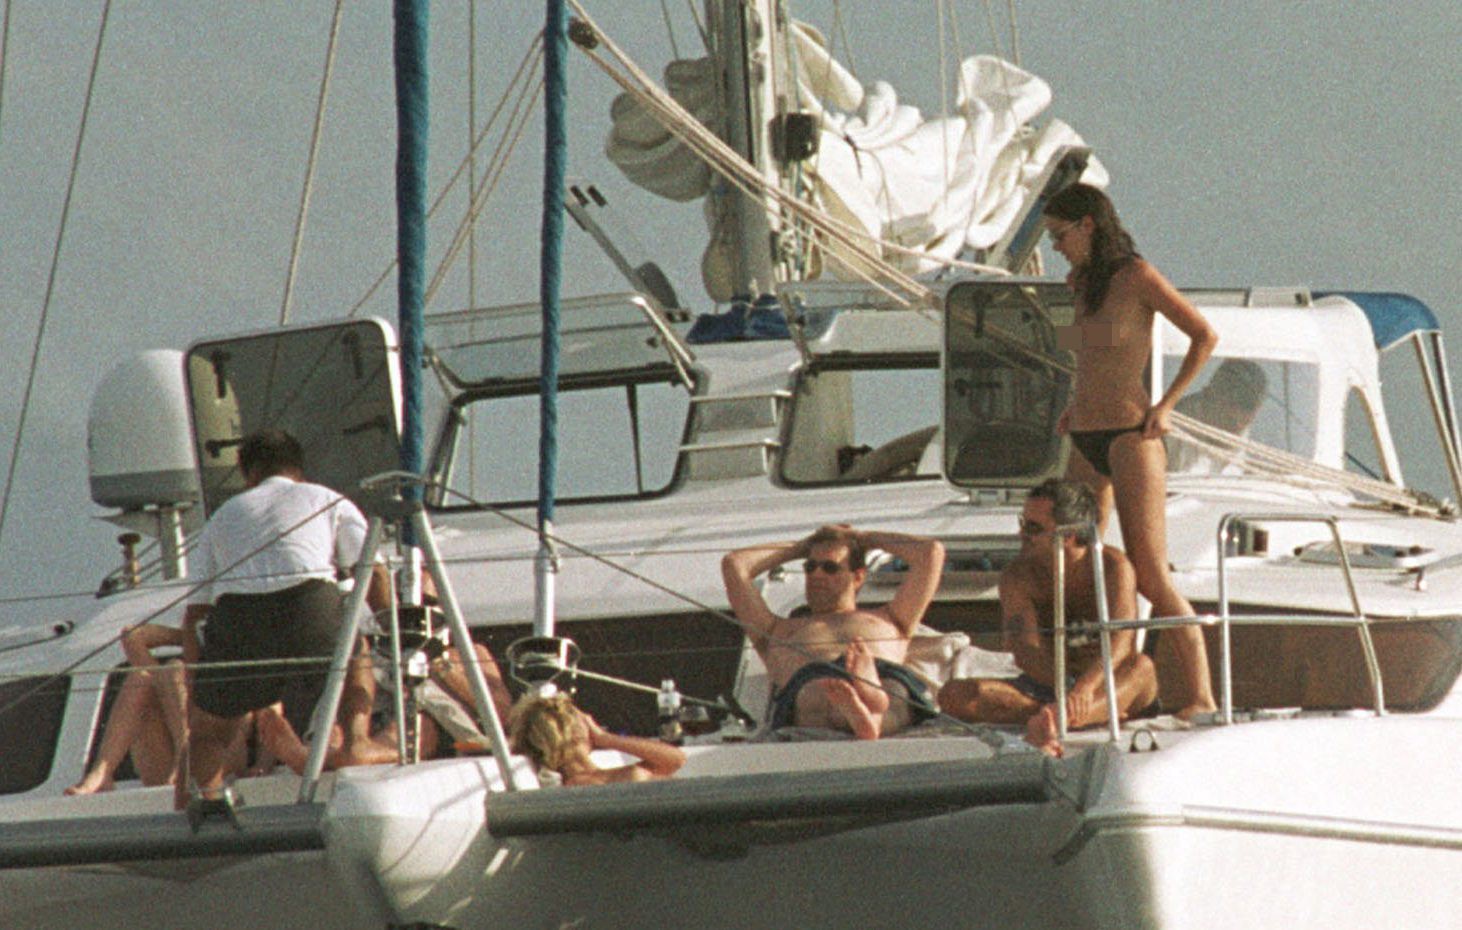 It is understood Prince Andrew was on a trip off Thailand organised by pal Mr Eliasch when he was photographed on a yacht in 2001